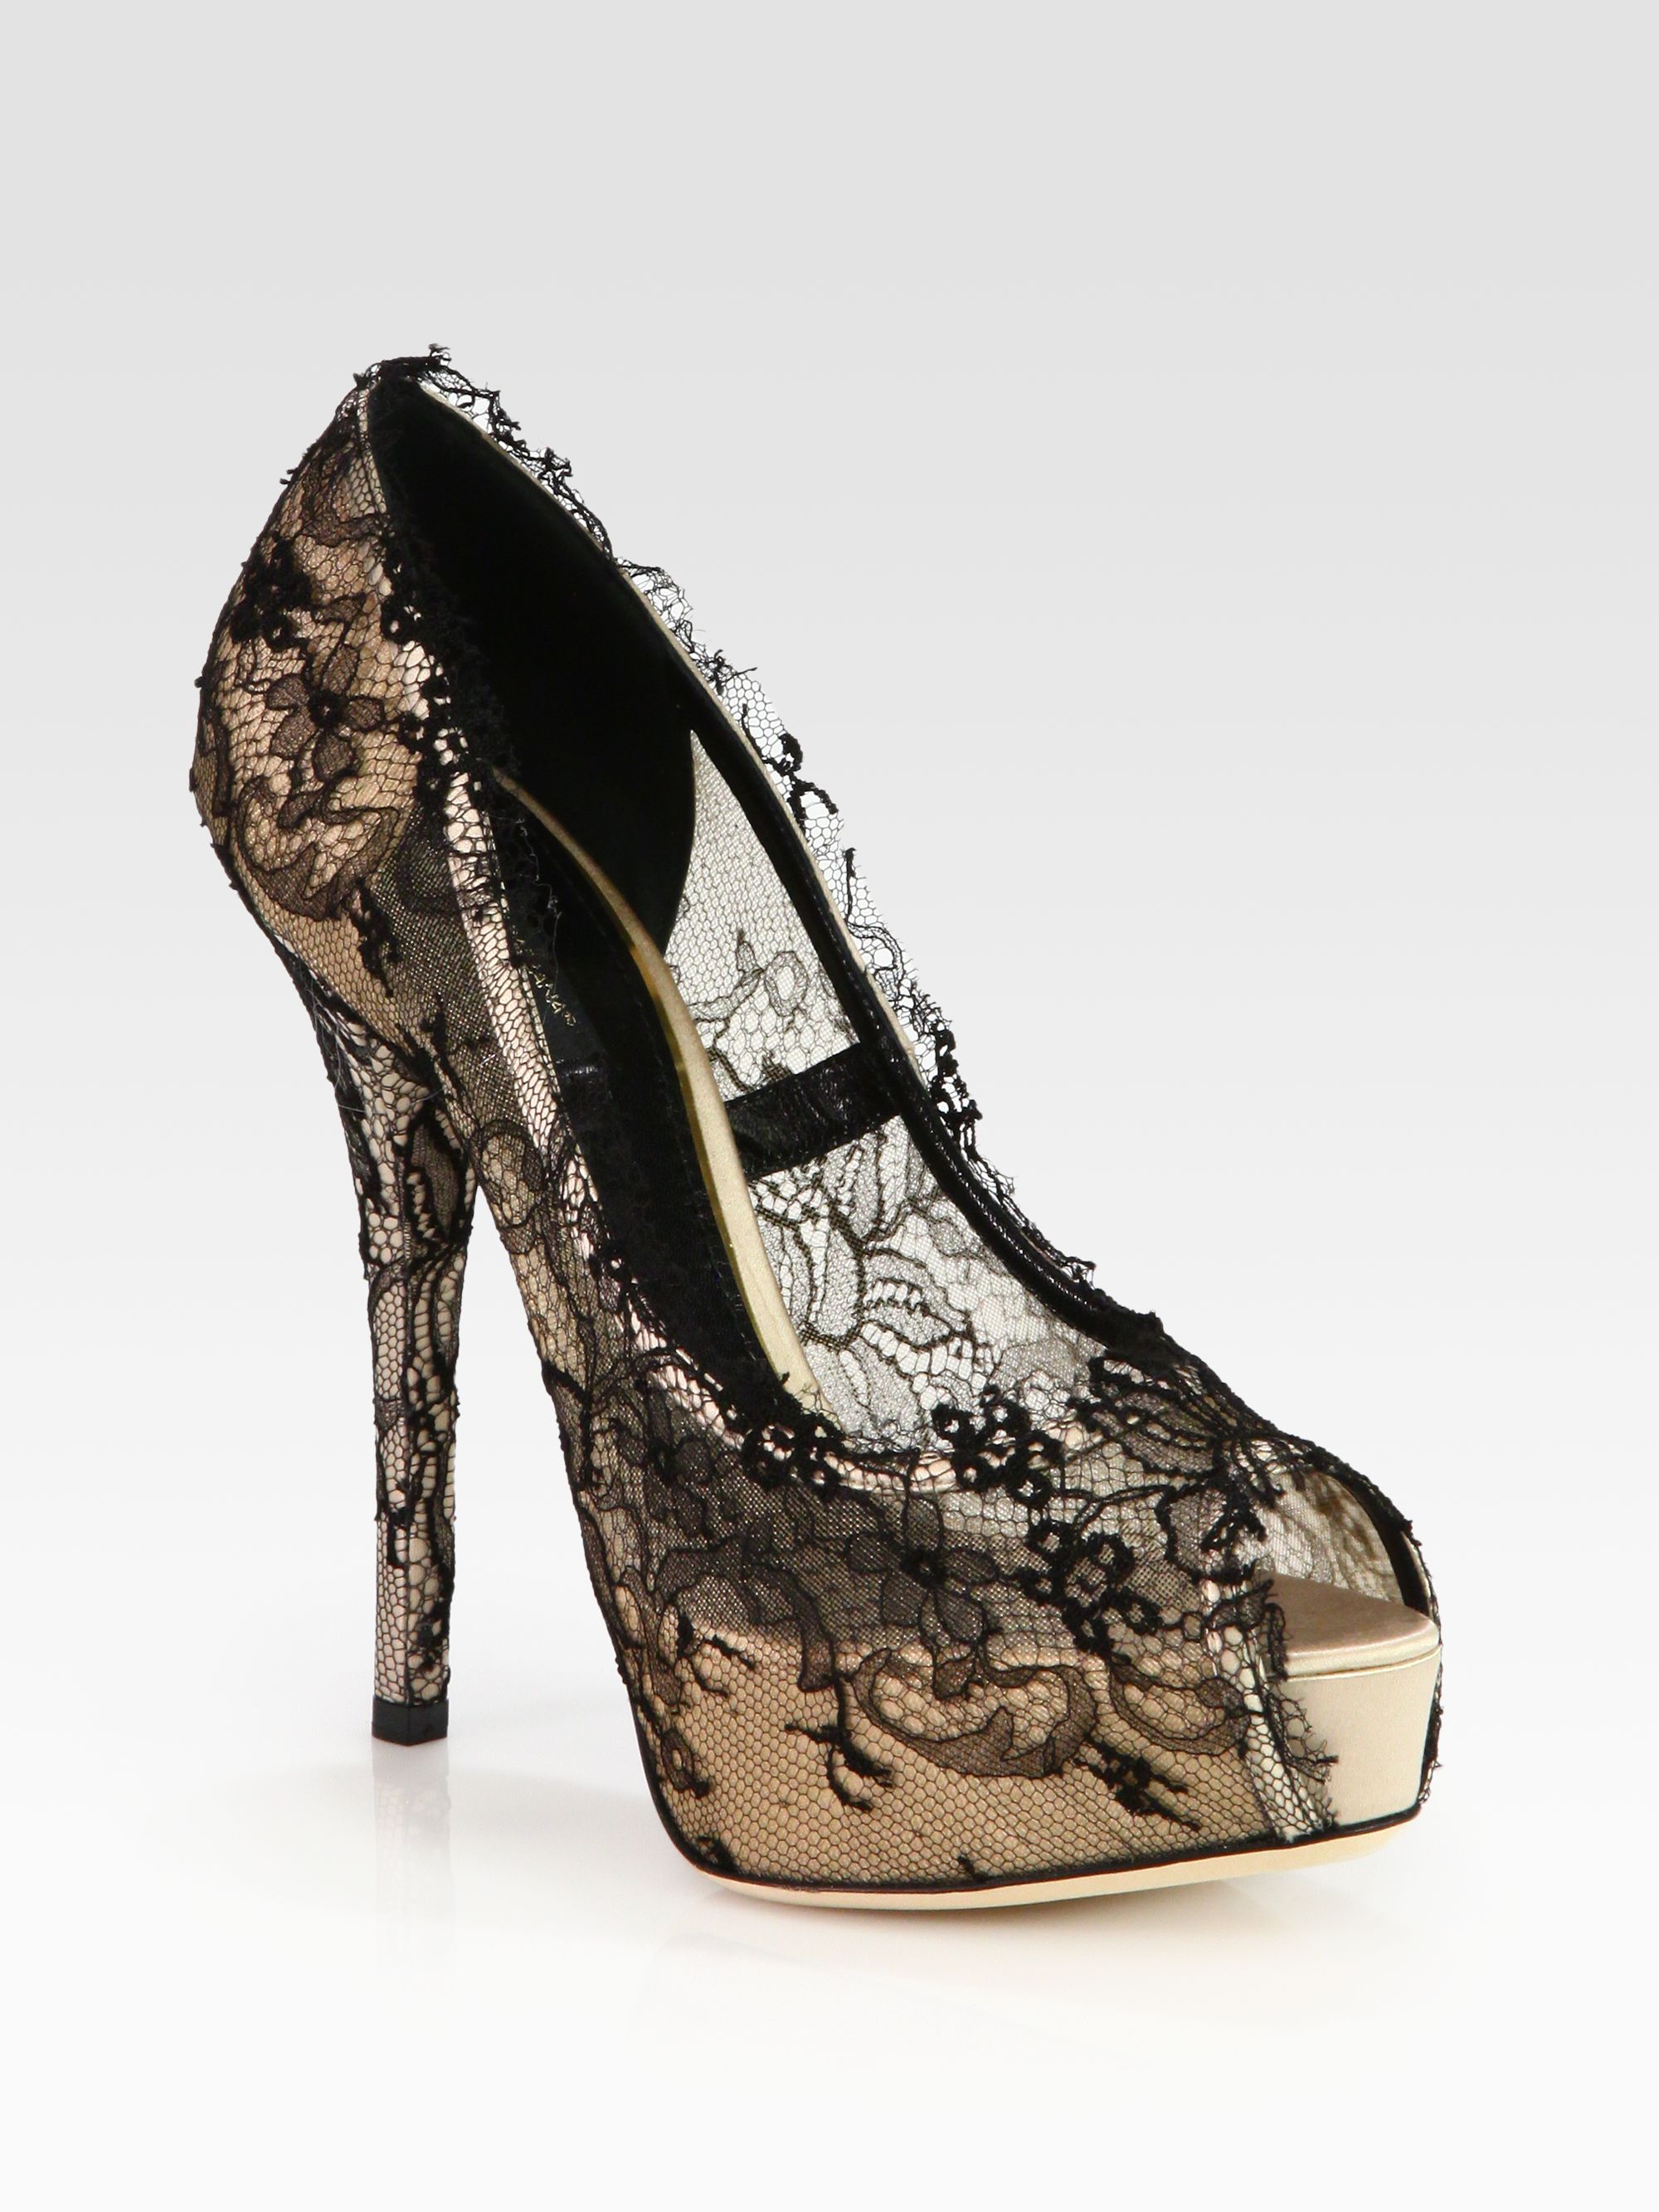 Lyst - Dolce & gabbana Lacecovered Satin Platform Pumps in Natural